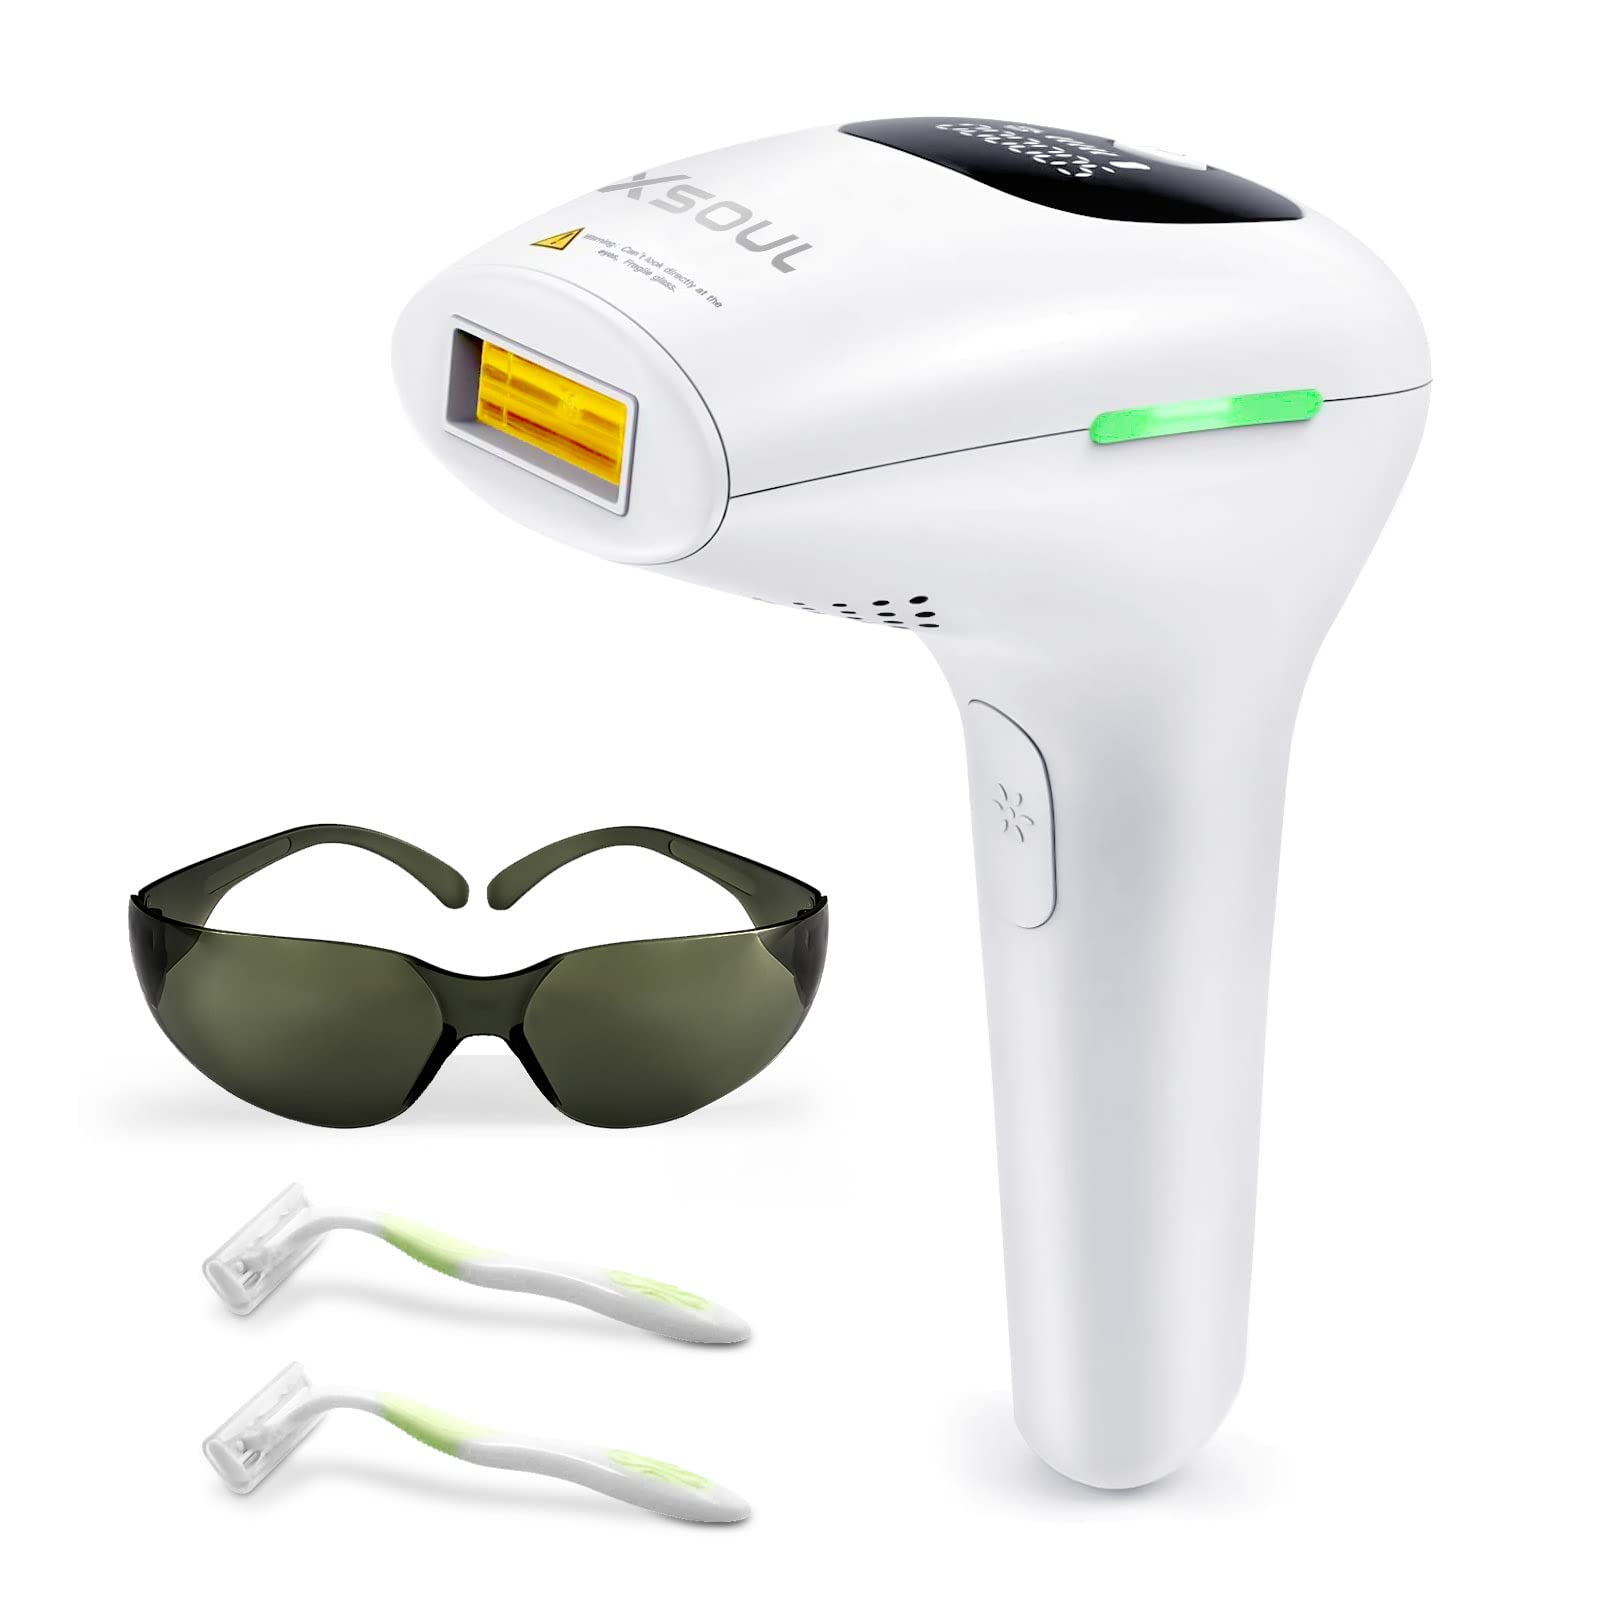 Mua XSOUL At-Home IPL Hair Removal for Women and Men Permanent Hair Removal  999,999 Flashes Painless Hair Remover on Armpits Back Legs Arms Face Bikini  Line, Corded trên Amazon Mỹ chính hãng